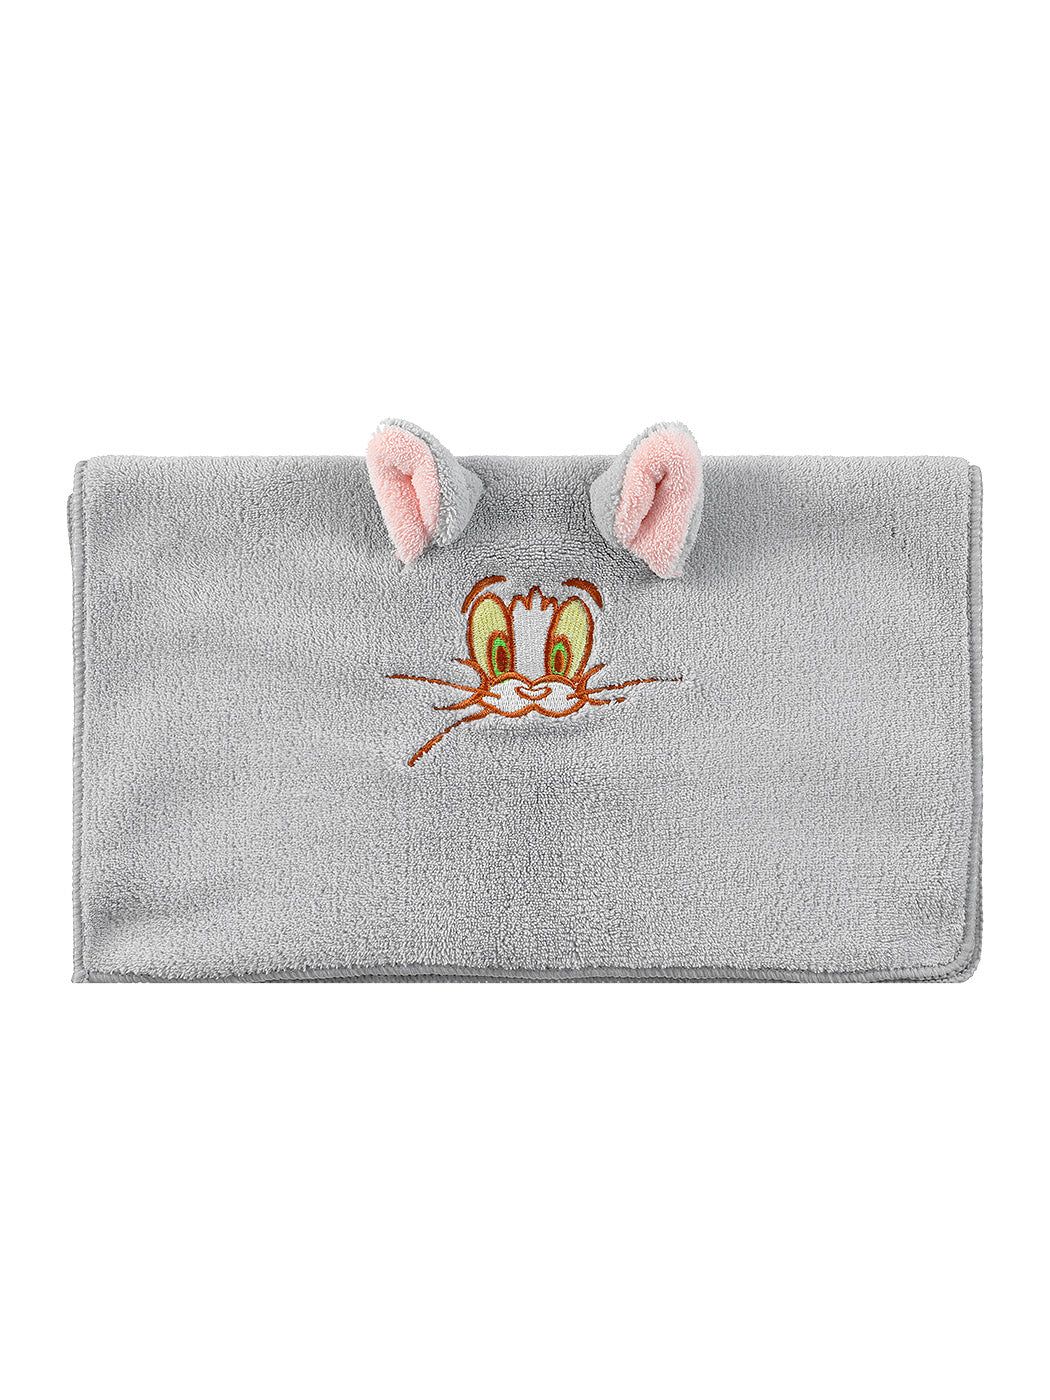 MINISO TOM & JERRY I LOVE CHEESE COLLECTION HAND TOWEL(GRAY) 2010428412109 TOWEL